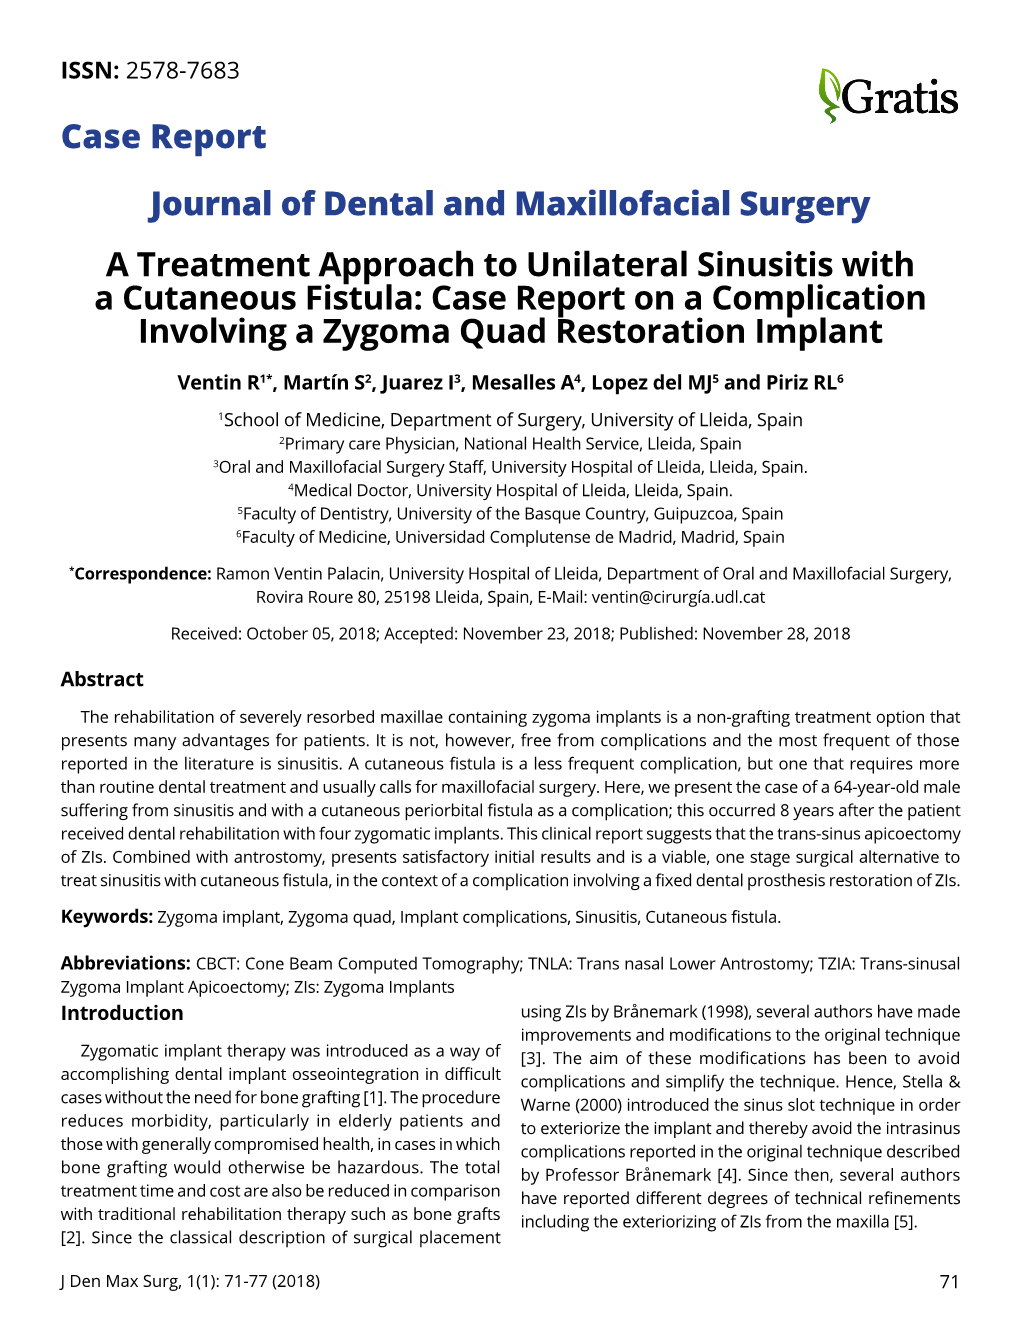 Journal of Dental and Maxillofacial Surgery a Treatment Approach to Unilateral Sinusitis with a Cutaneous Fistula